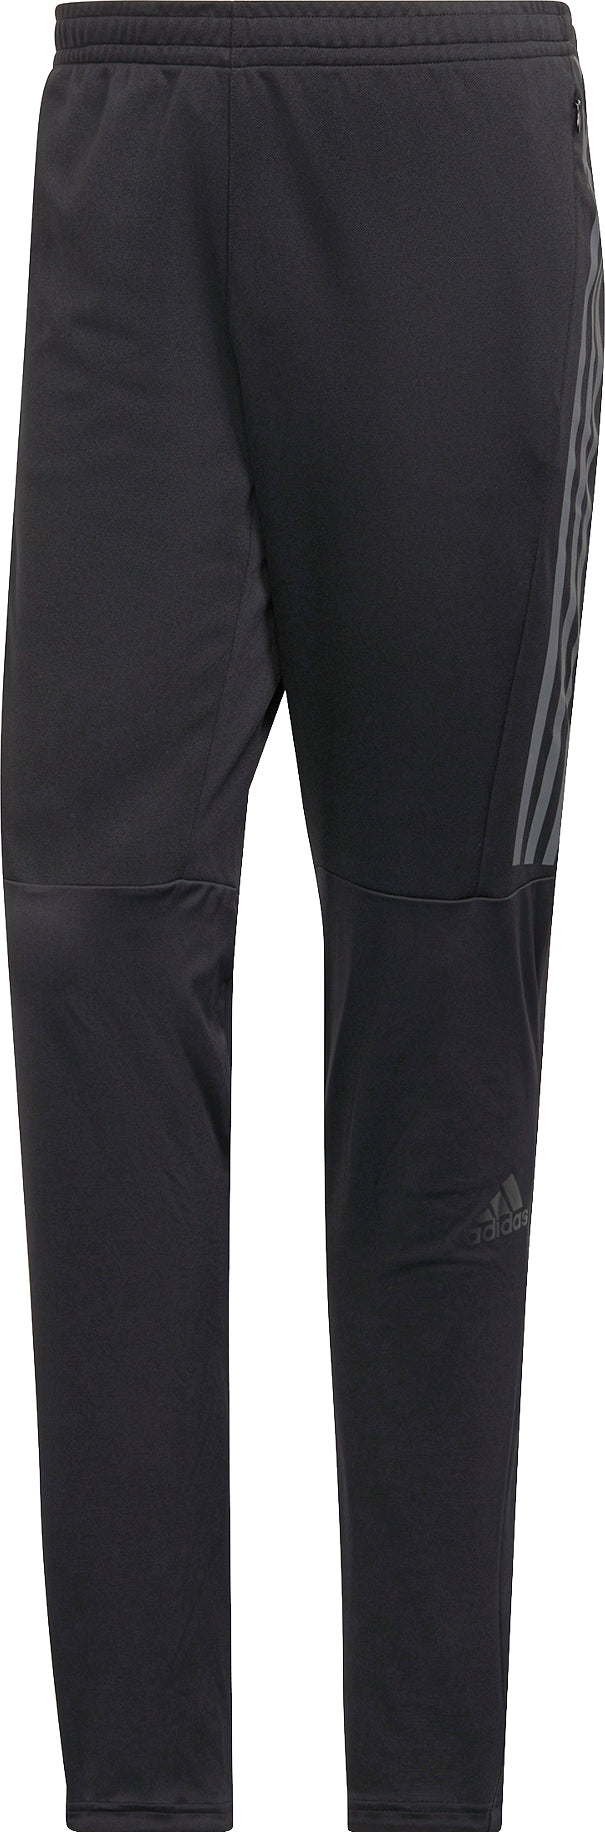 adidas Running trousers RUN ICONS in black